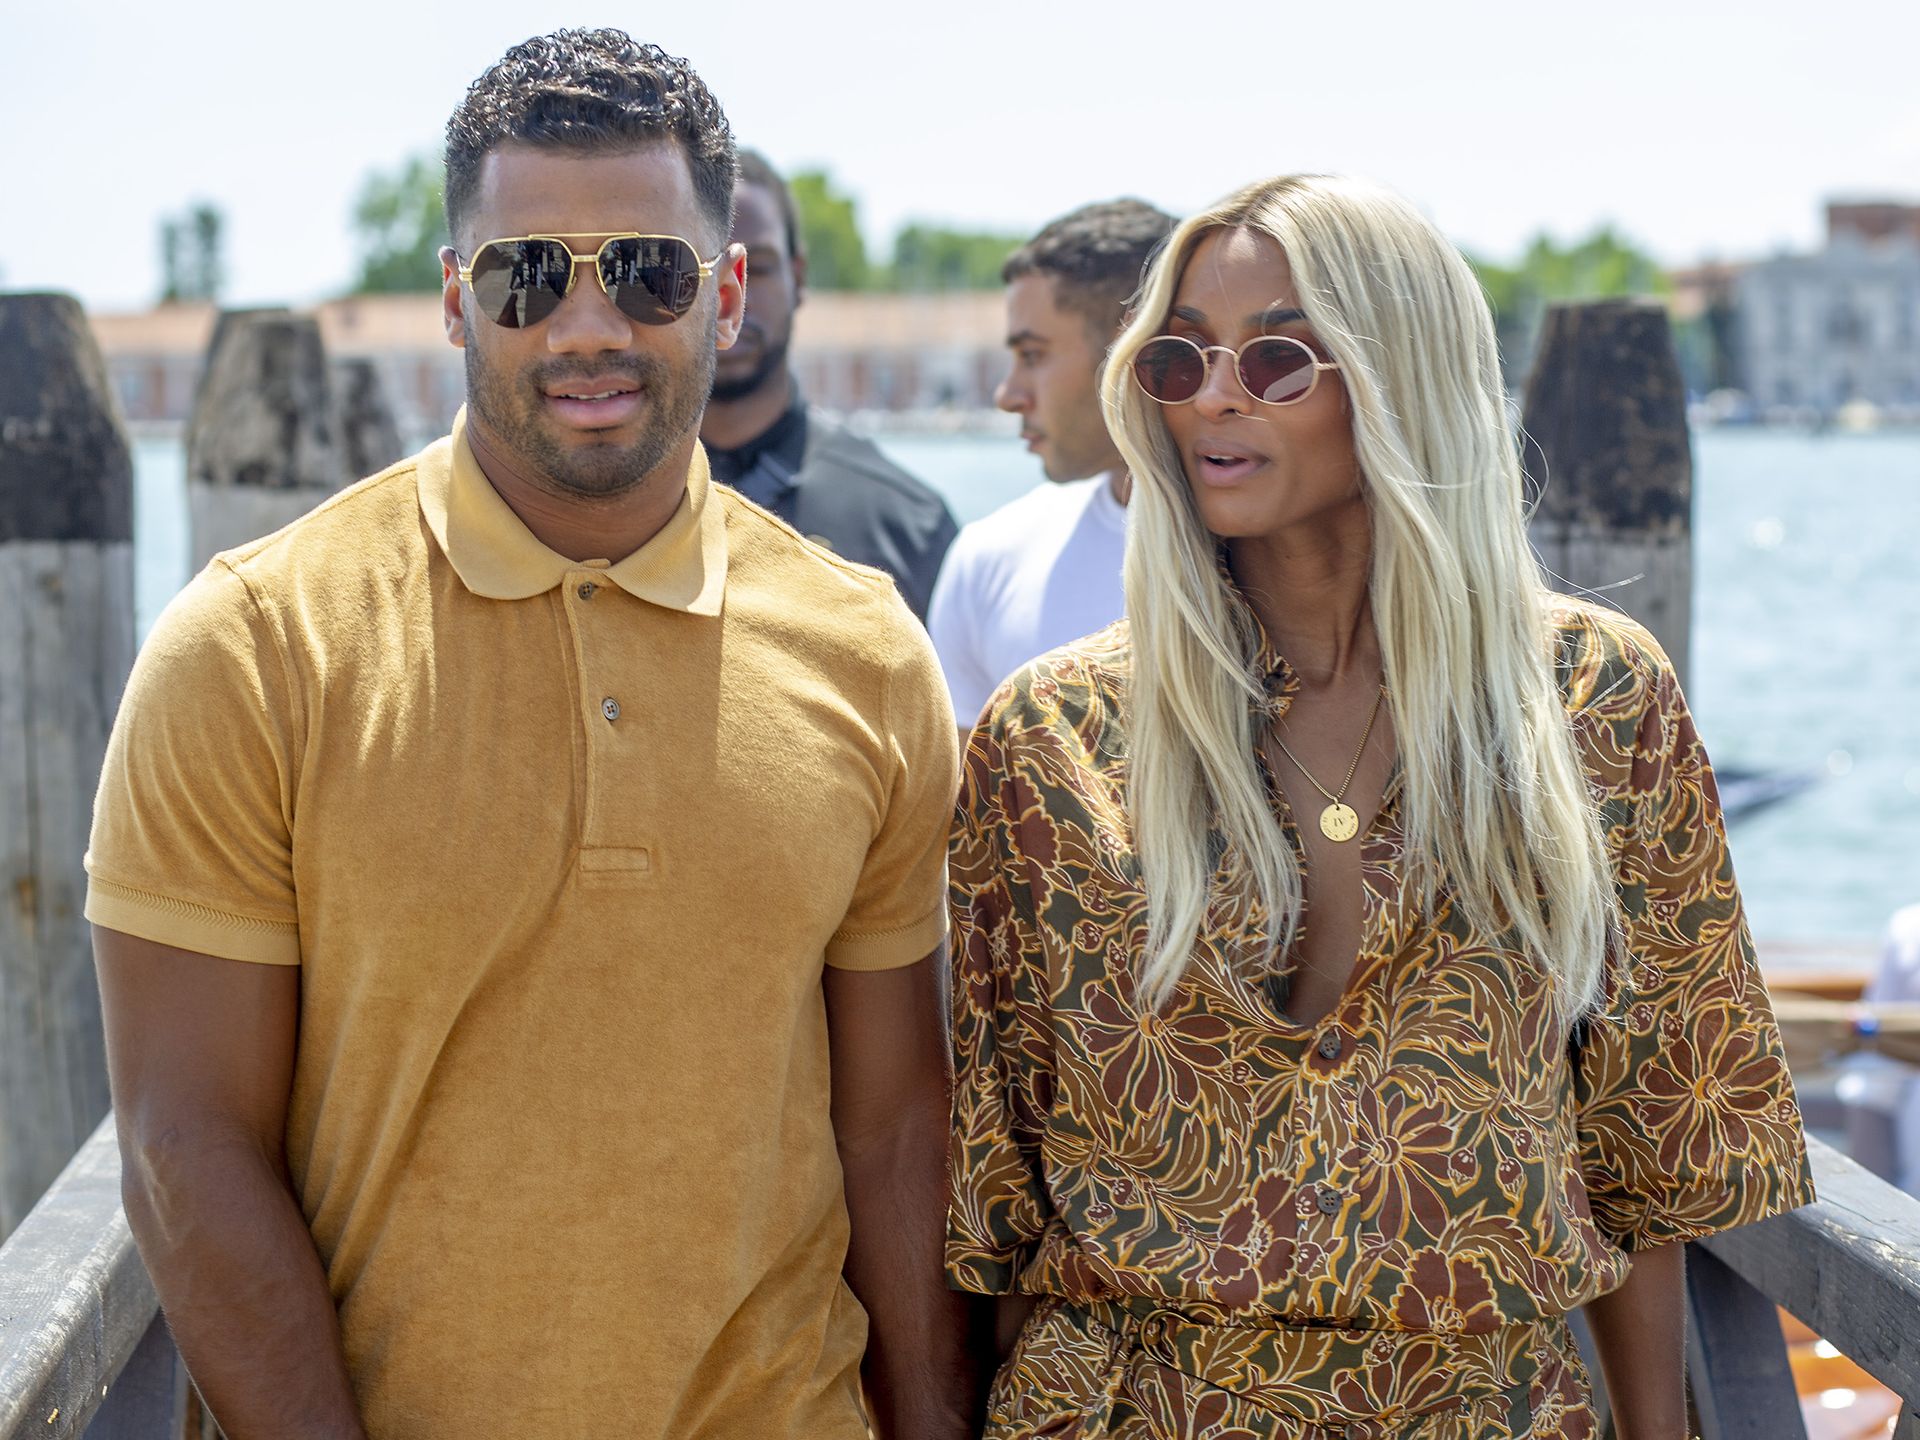 Russell Wilson and Ciara's fashion startup The House of LR&C gets